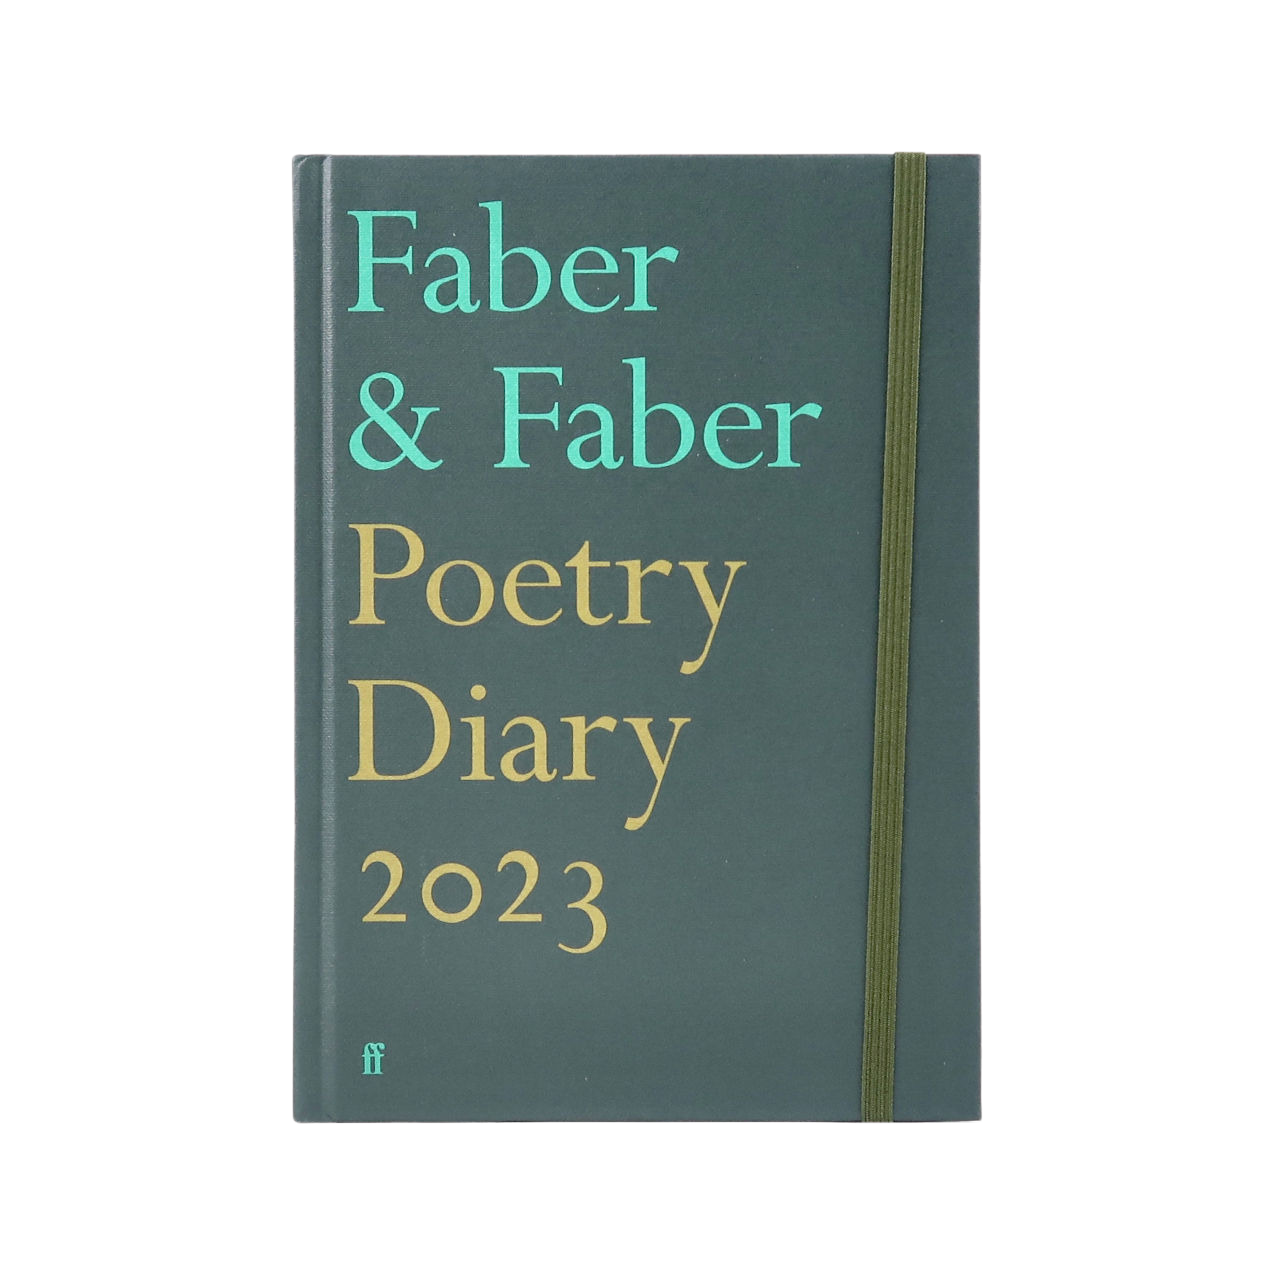 Faber & Faber Faber Poetry Diary 2023